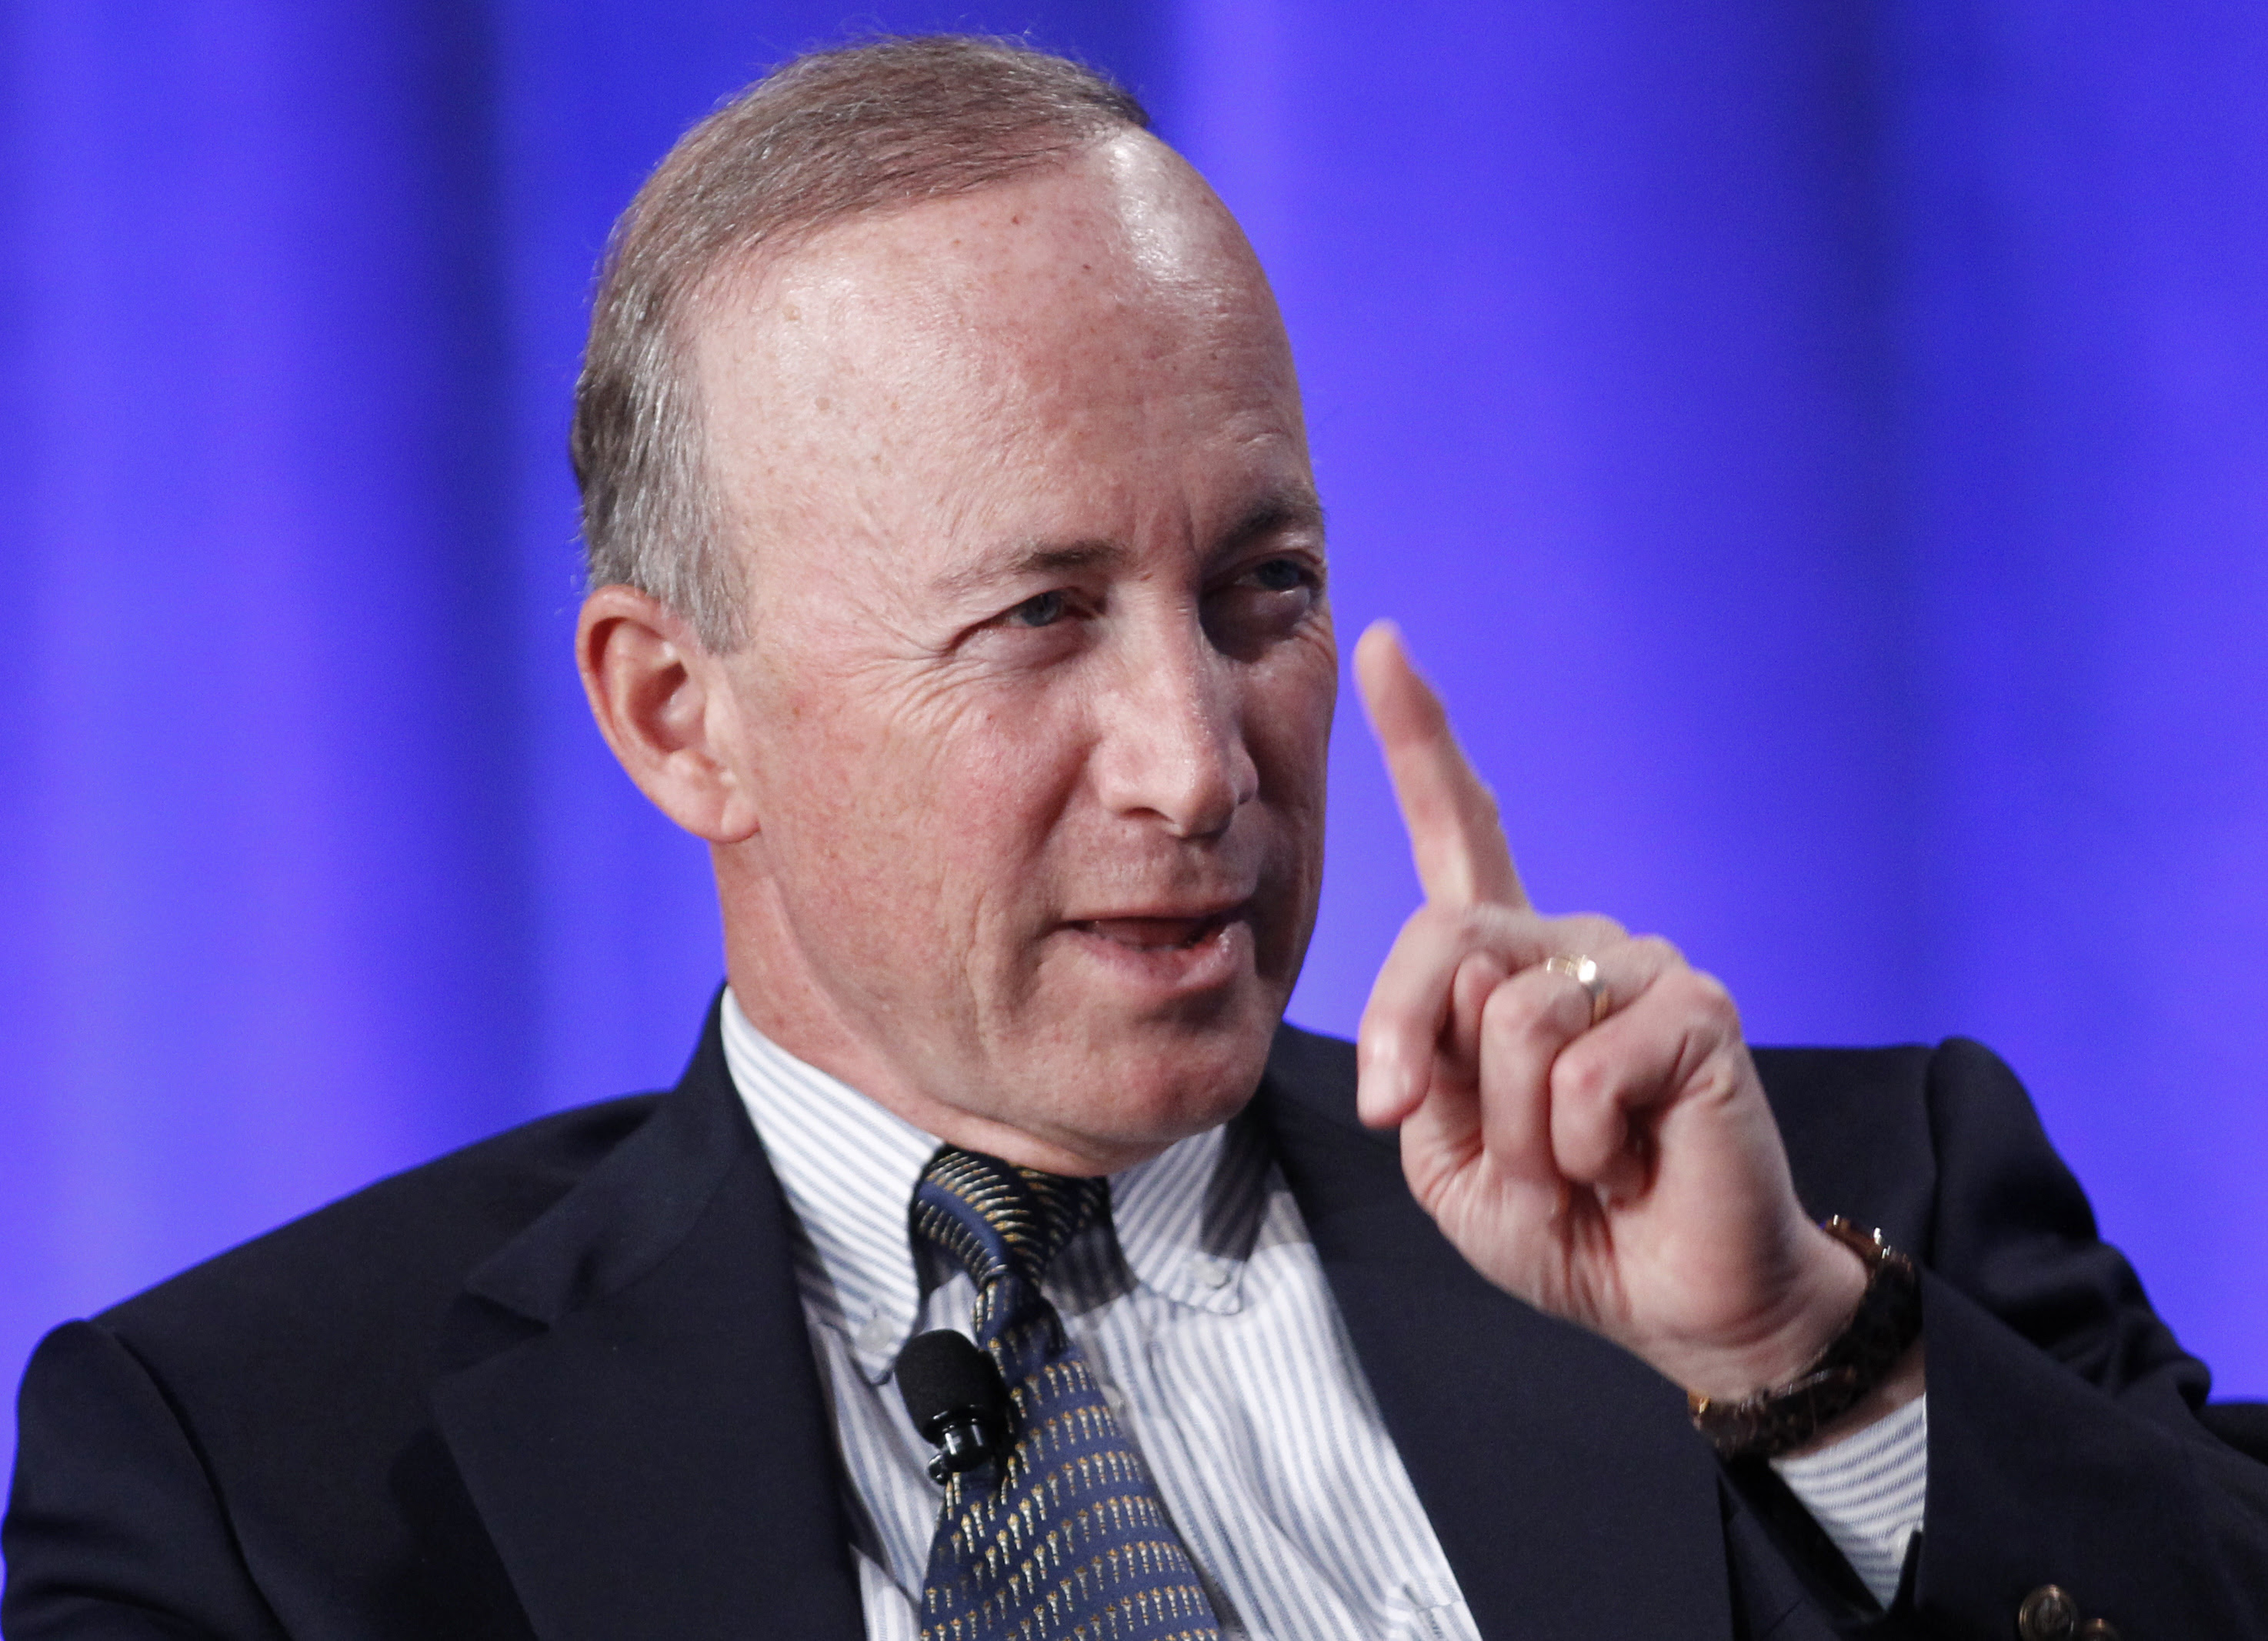 State of Indiana Governor Mitch Daniels takes part in a panel discussion titled "Why Wait for Washington? How States Can Create Jobs and Economic Growth" at the Milken Institute Global Conference in Beverly Hills, California May 1, 2012. REUTERS/Danny Moloshok